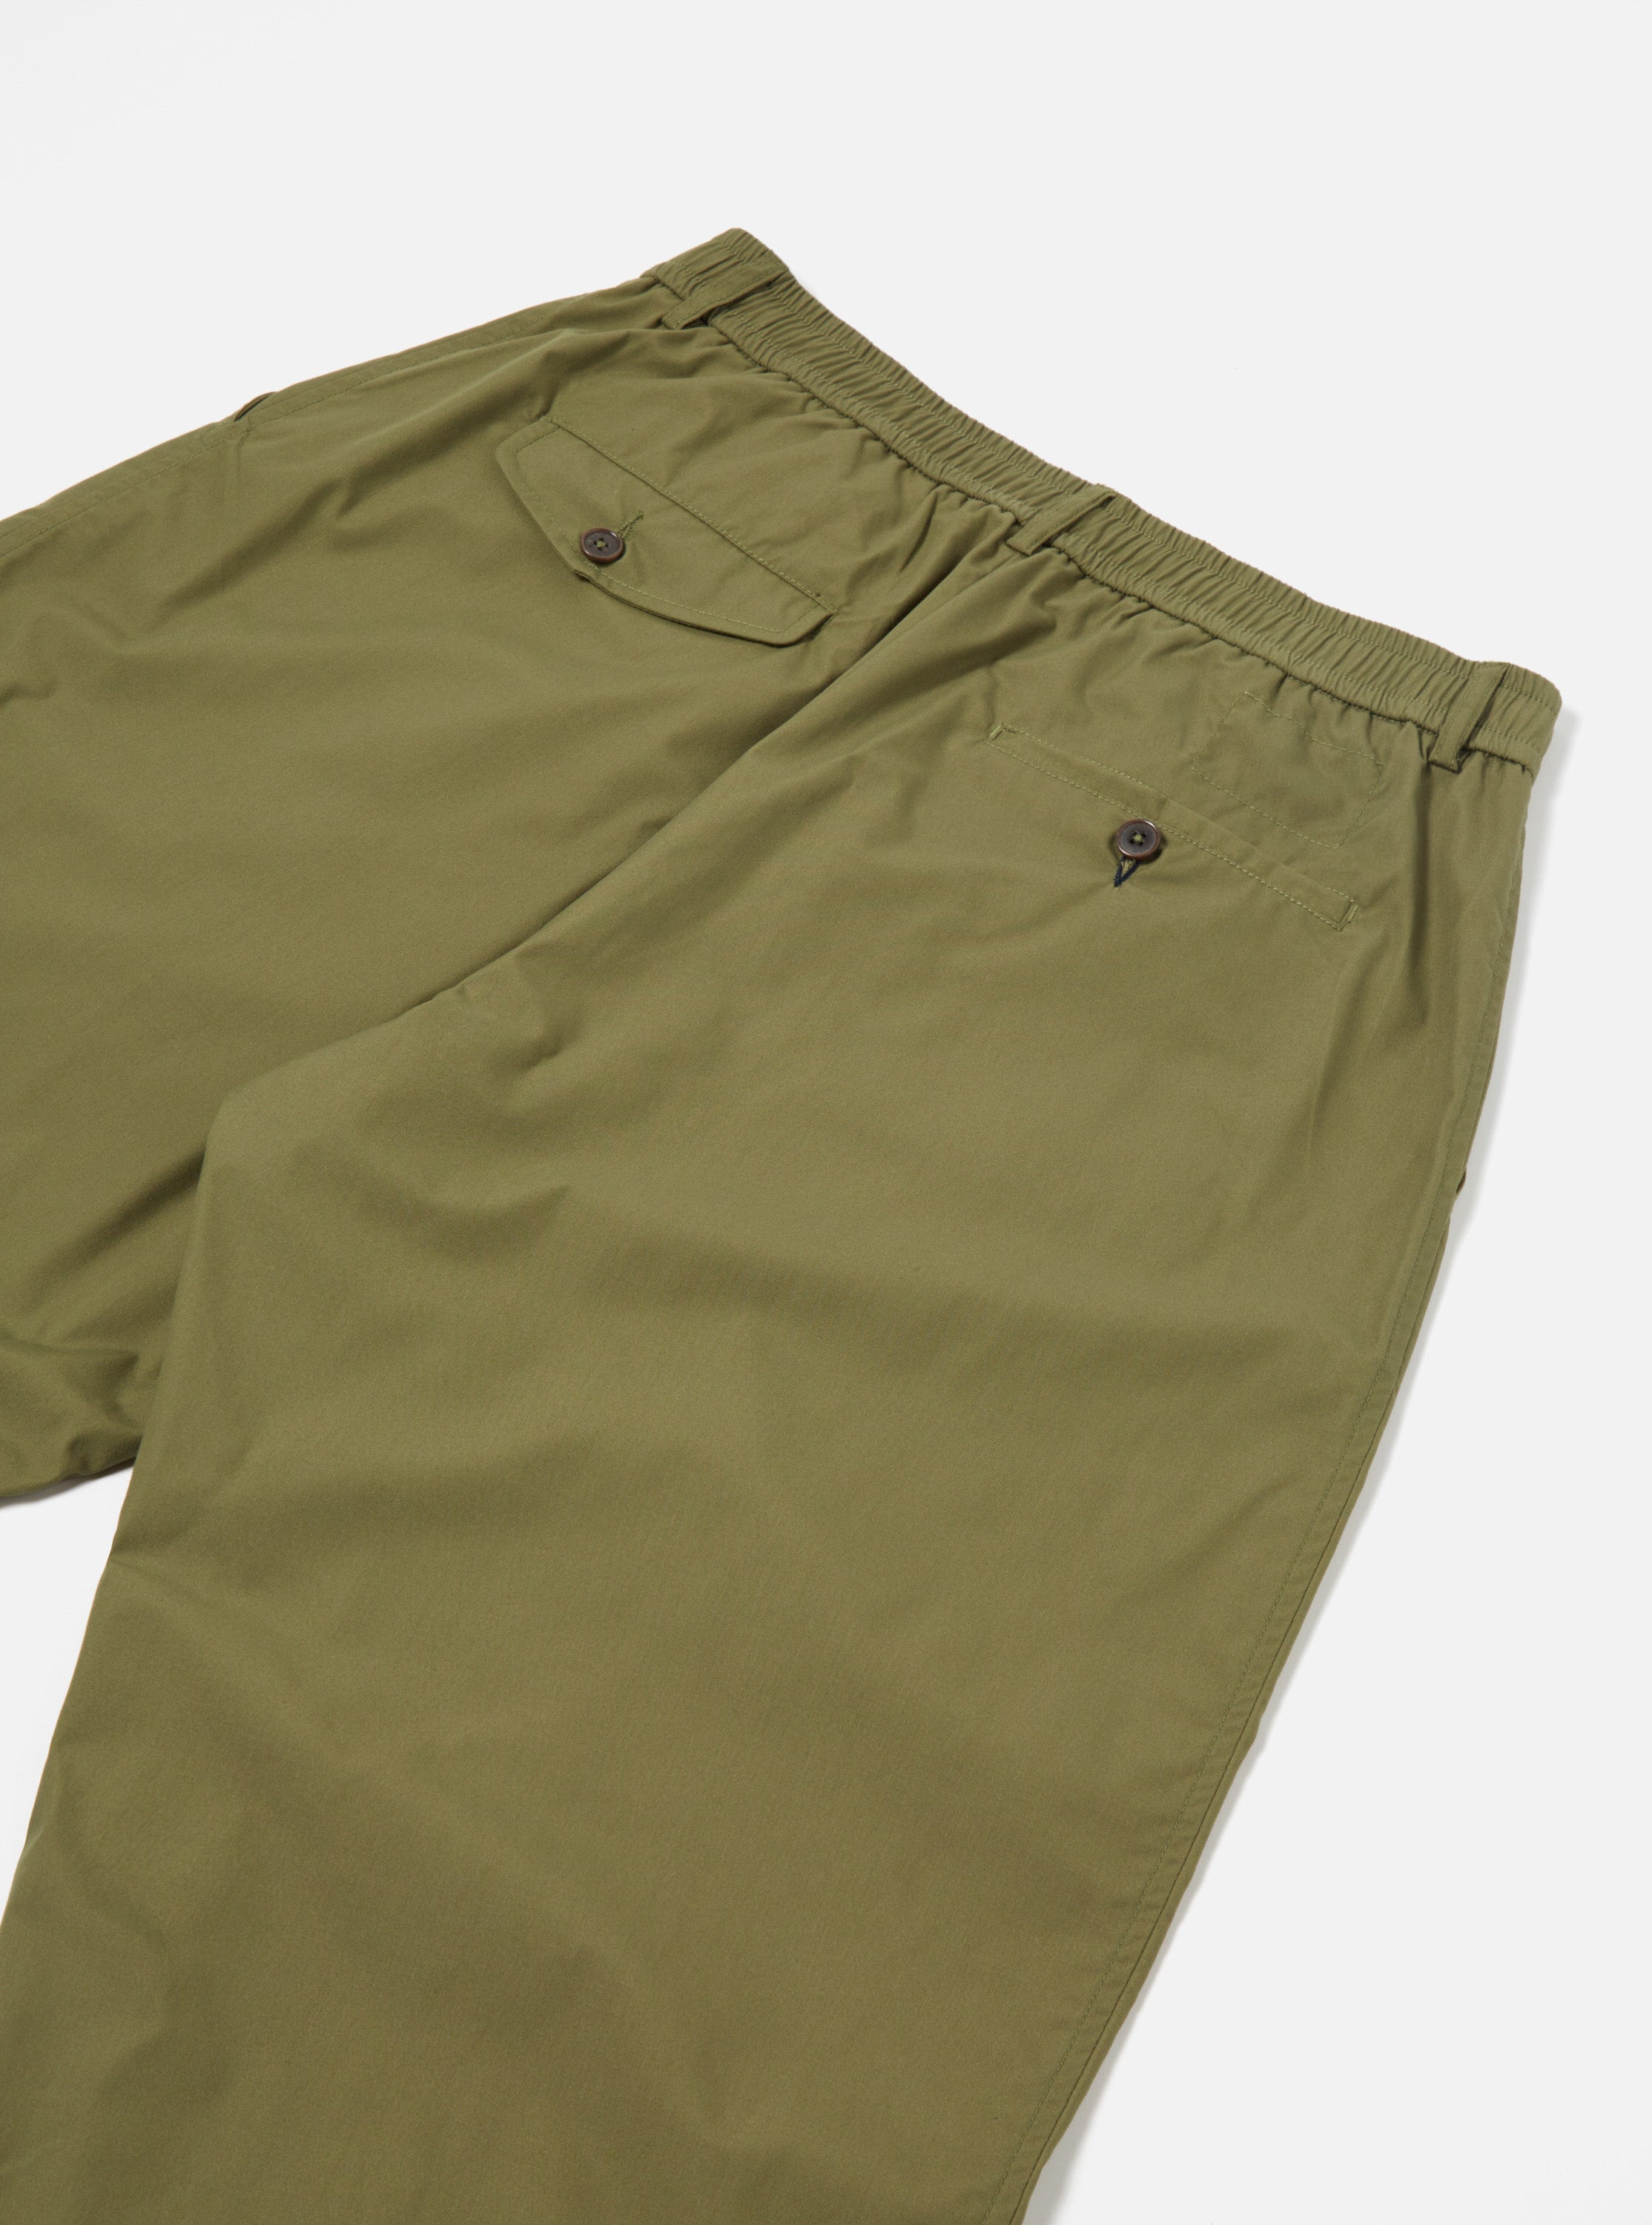 Universal Works Oxford Pant in Olive Recycled Poly Tech